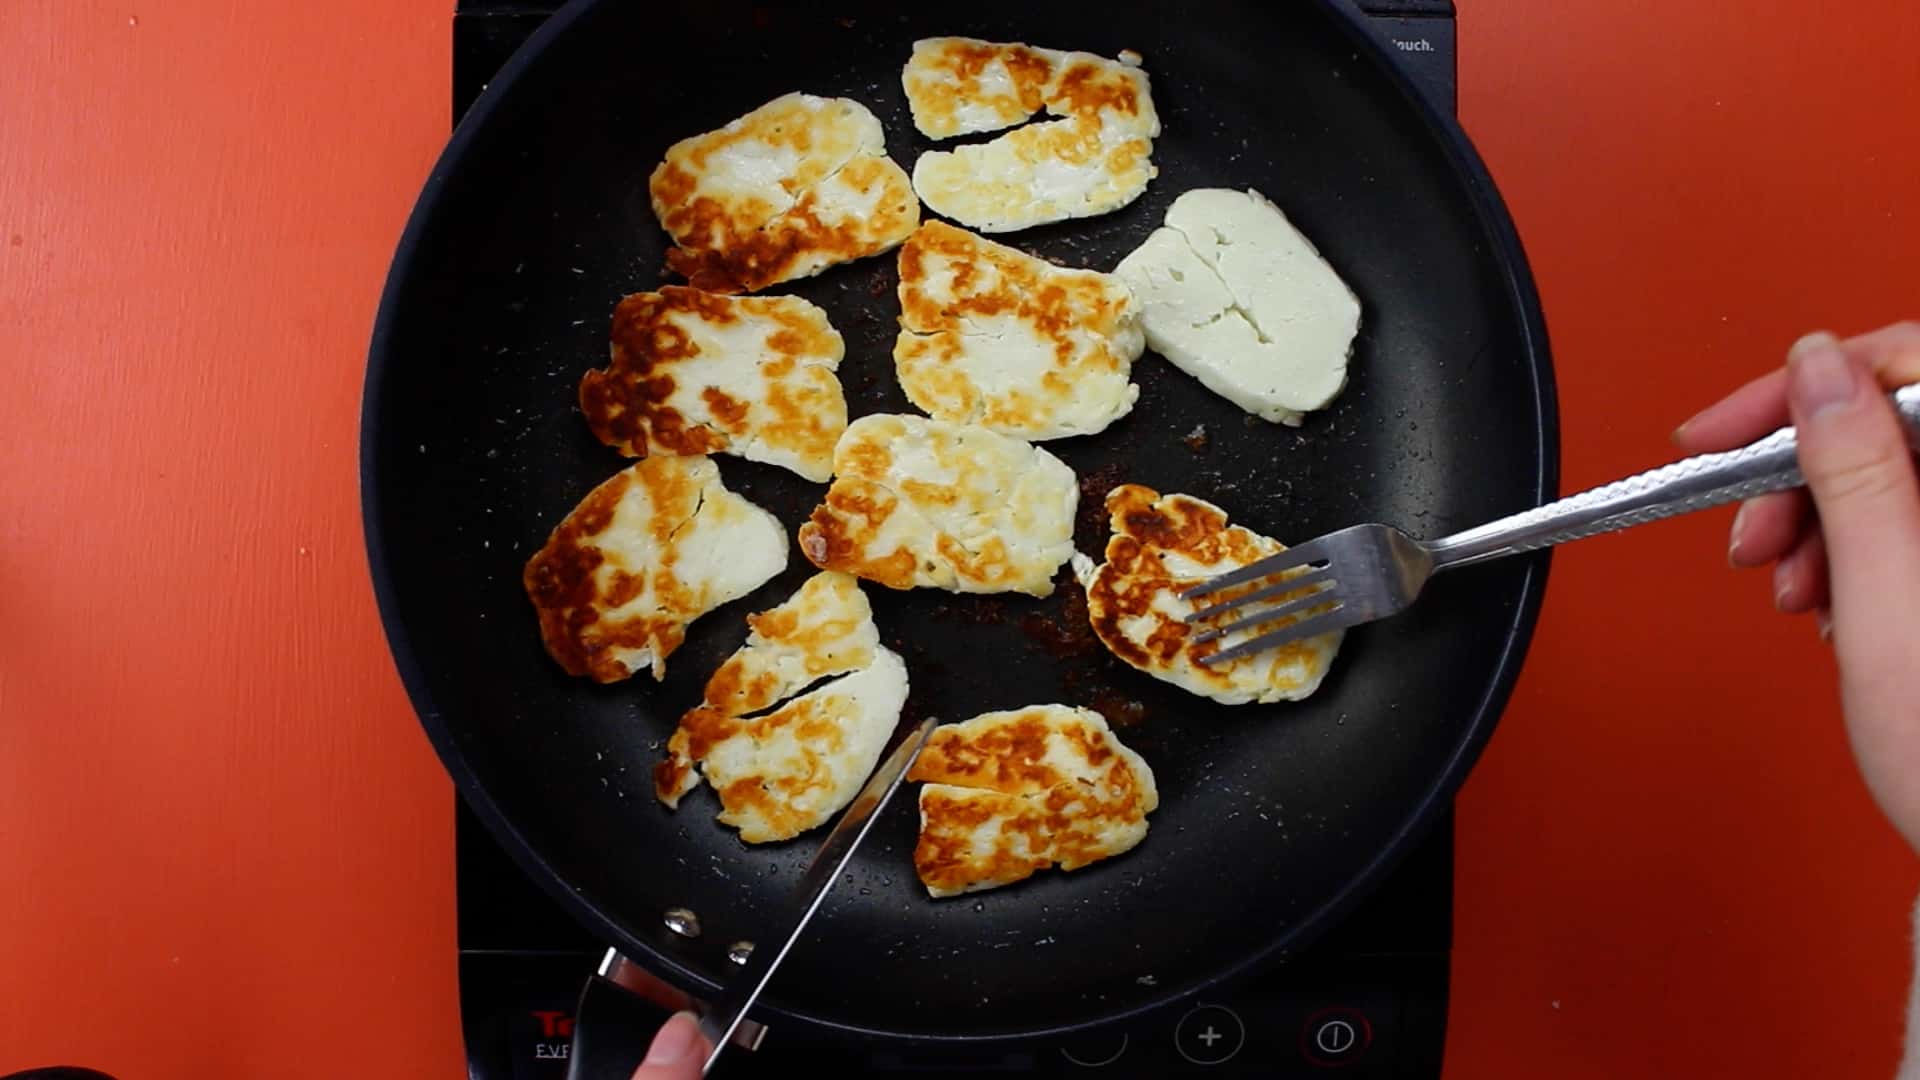 Halloumi slices browned in frying pan with with fork and knife used to rotate the slices..